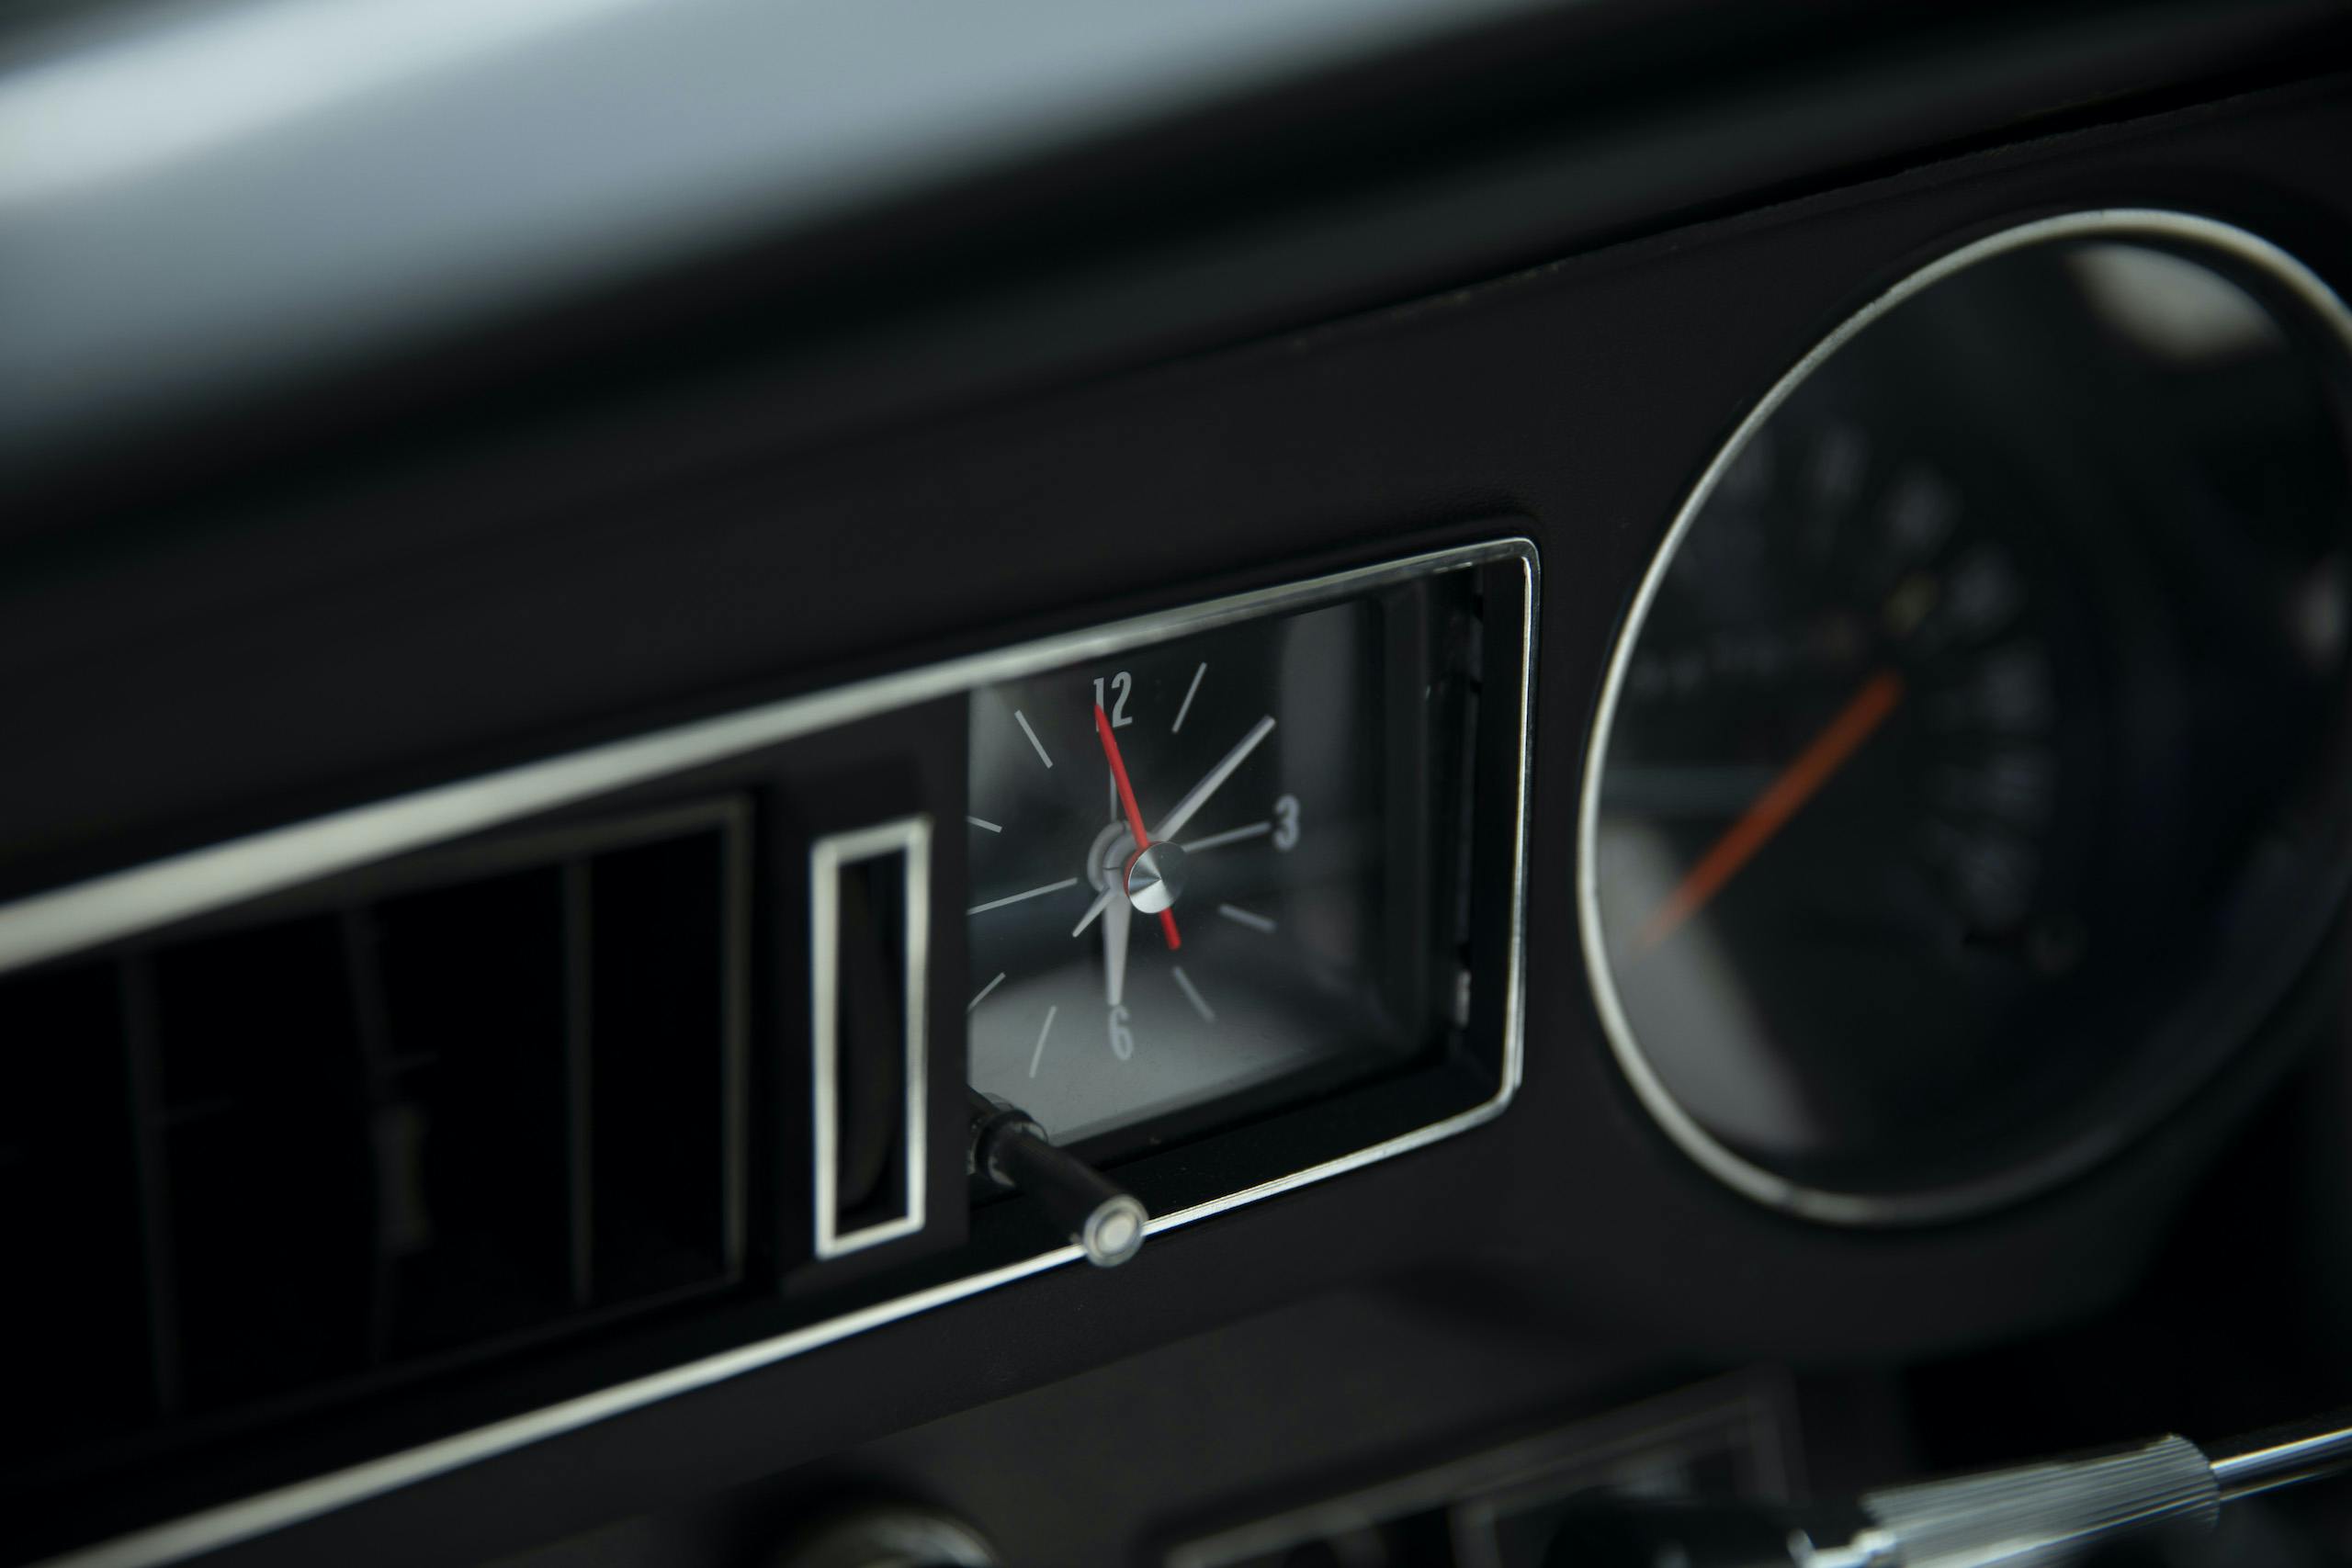 1973 Buick GS Stage 1 gran sport coupe clock